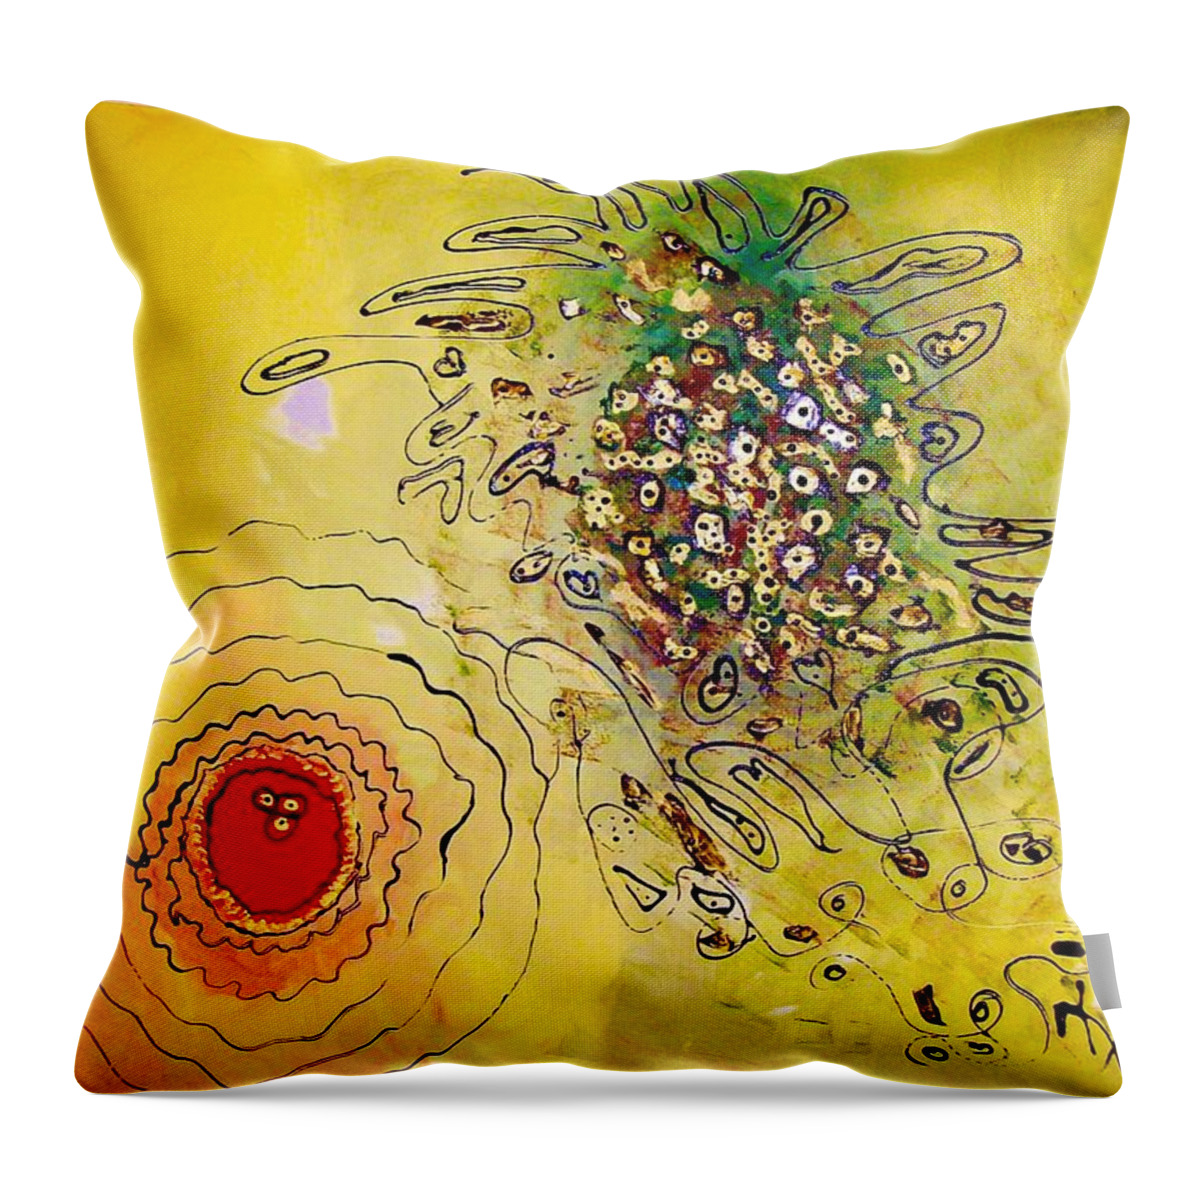  Abstract Throw Pillow featuring the painting The World is Waiting For the Sunrise by Kenlynn Schroeder